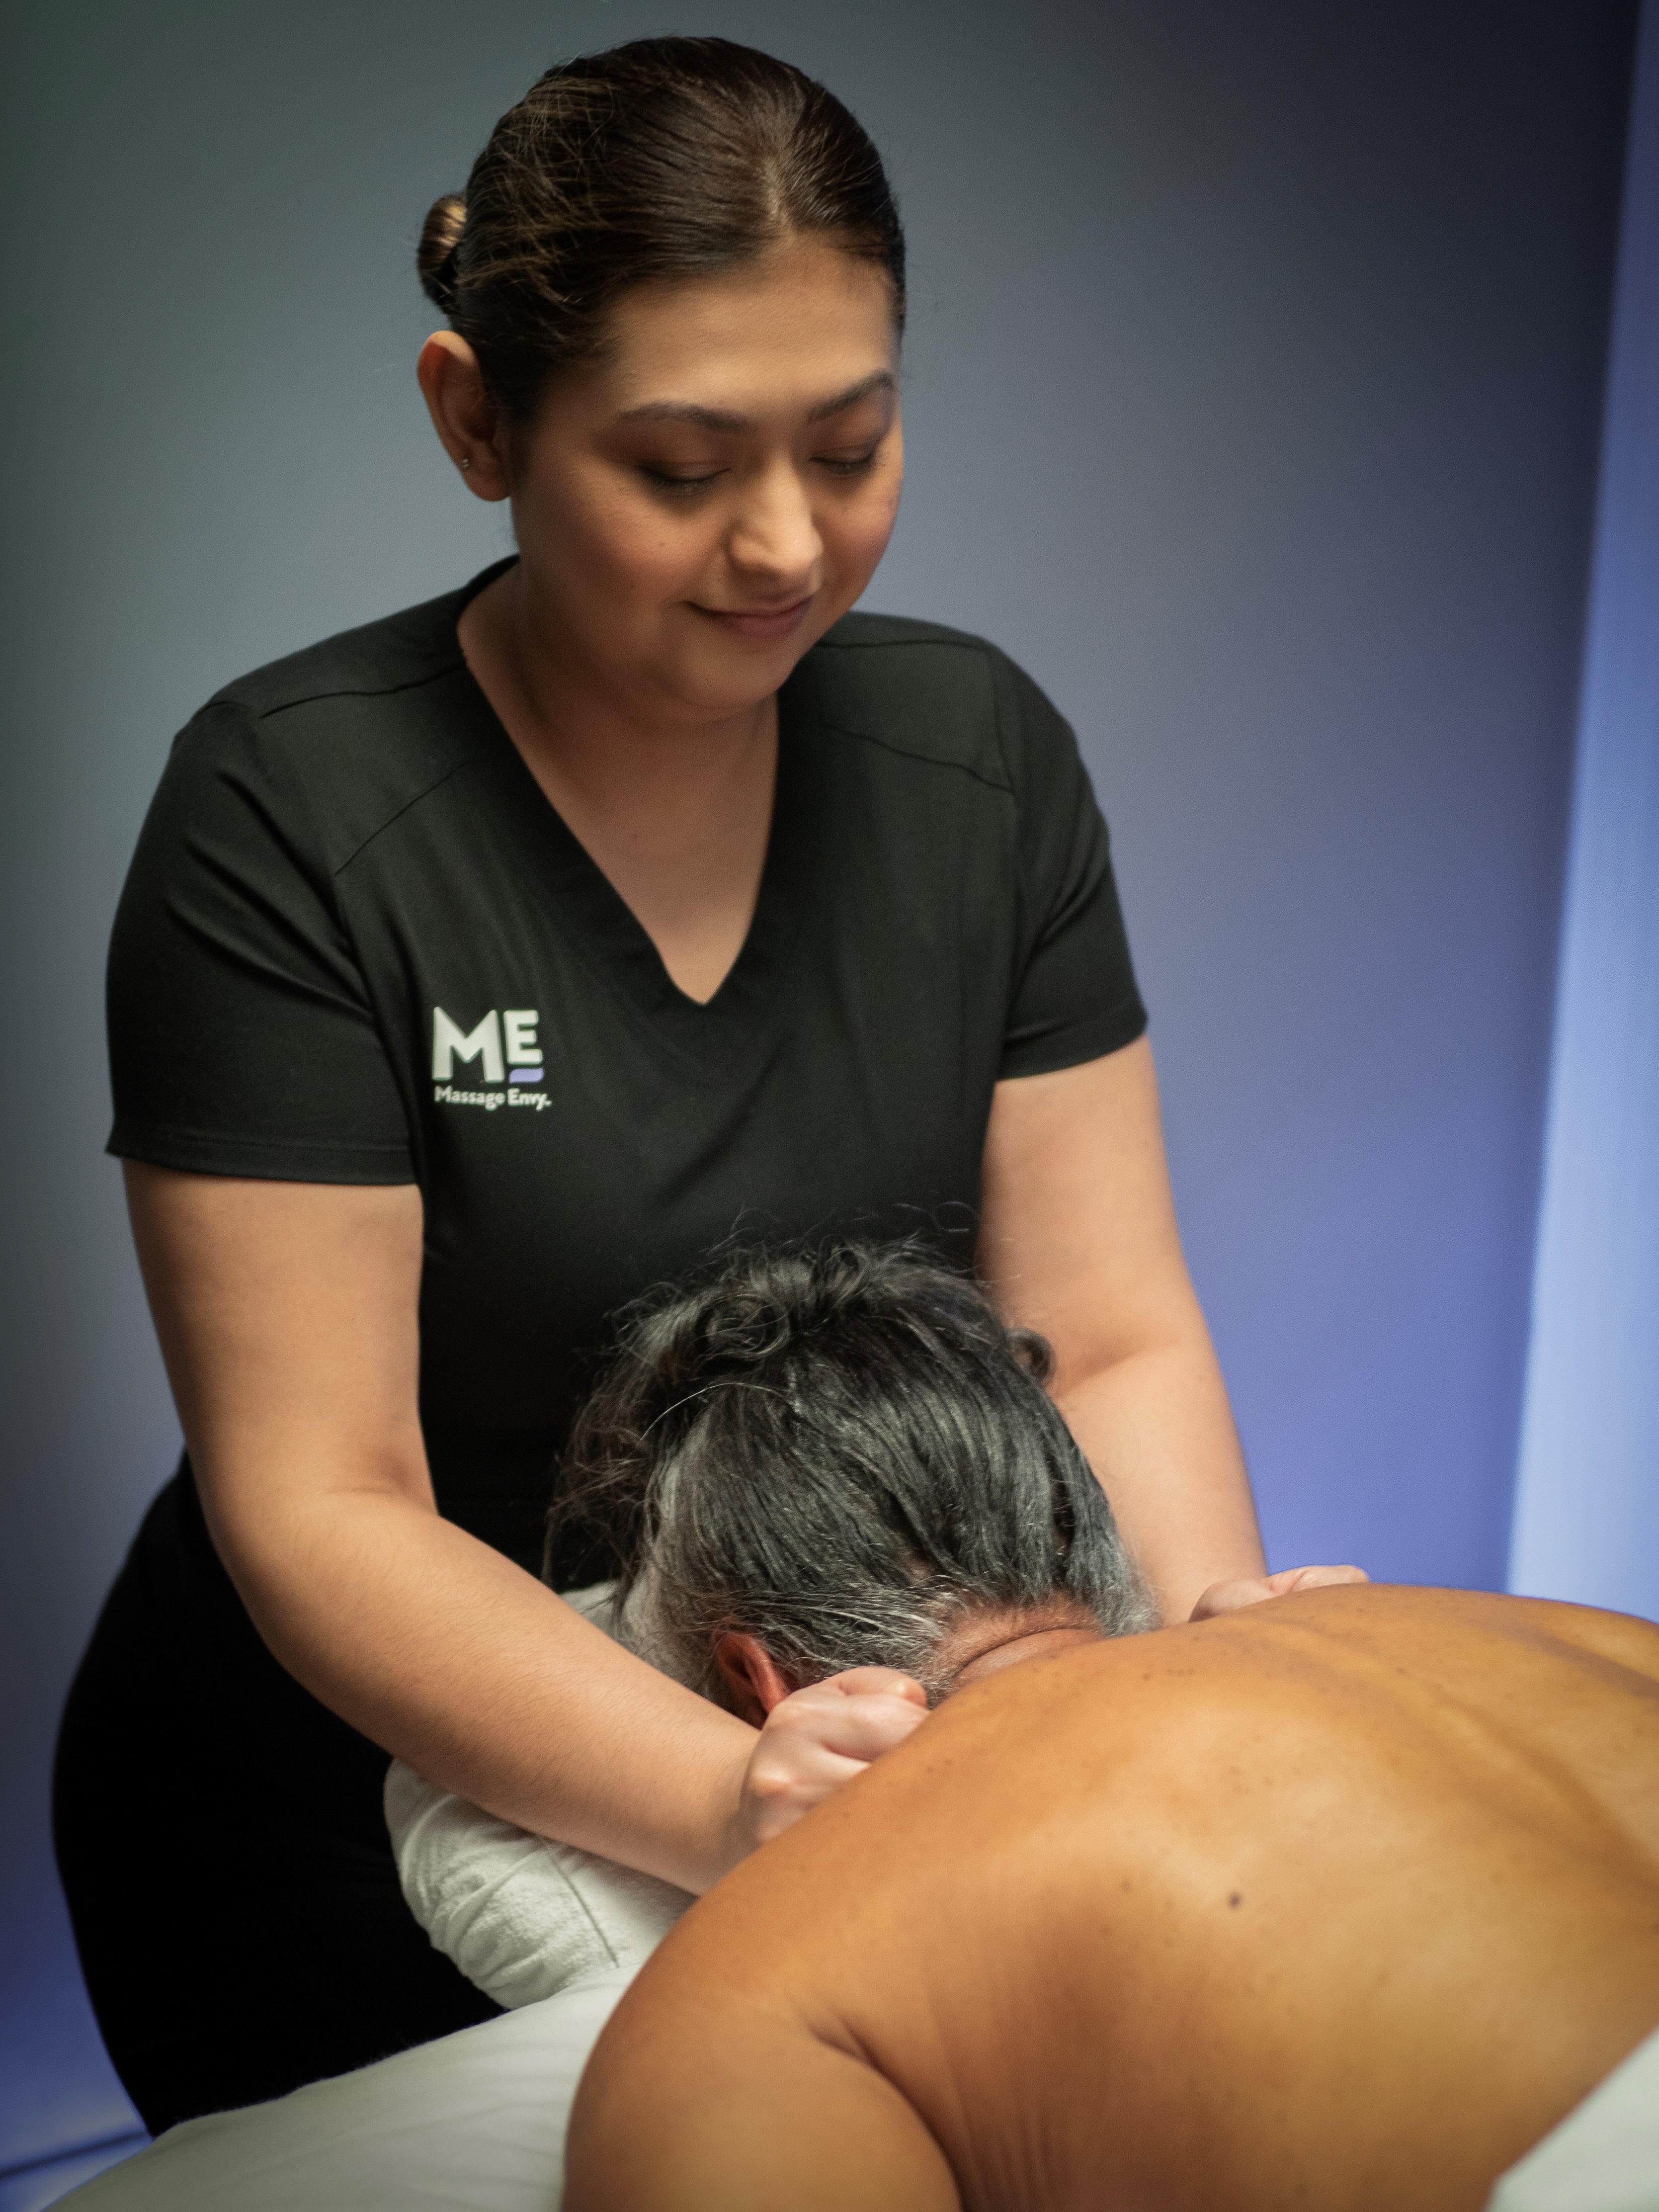 Massage therapists provide relaxation and relief with deep tissue massages